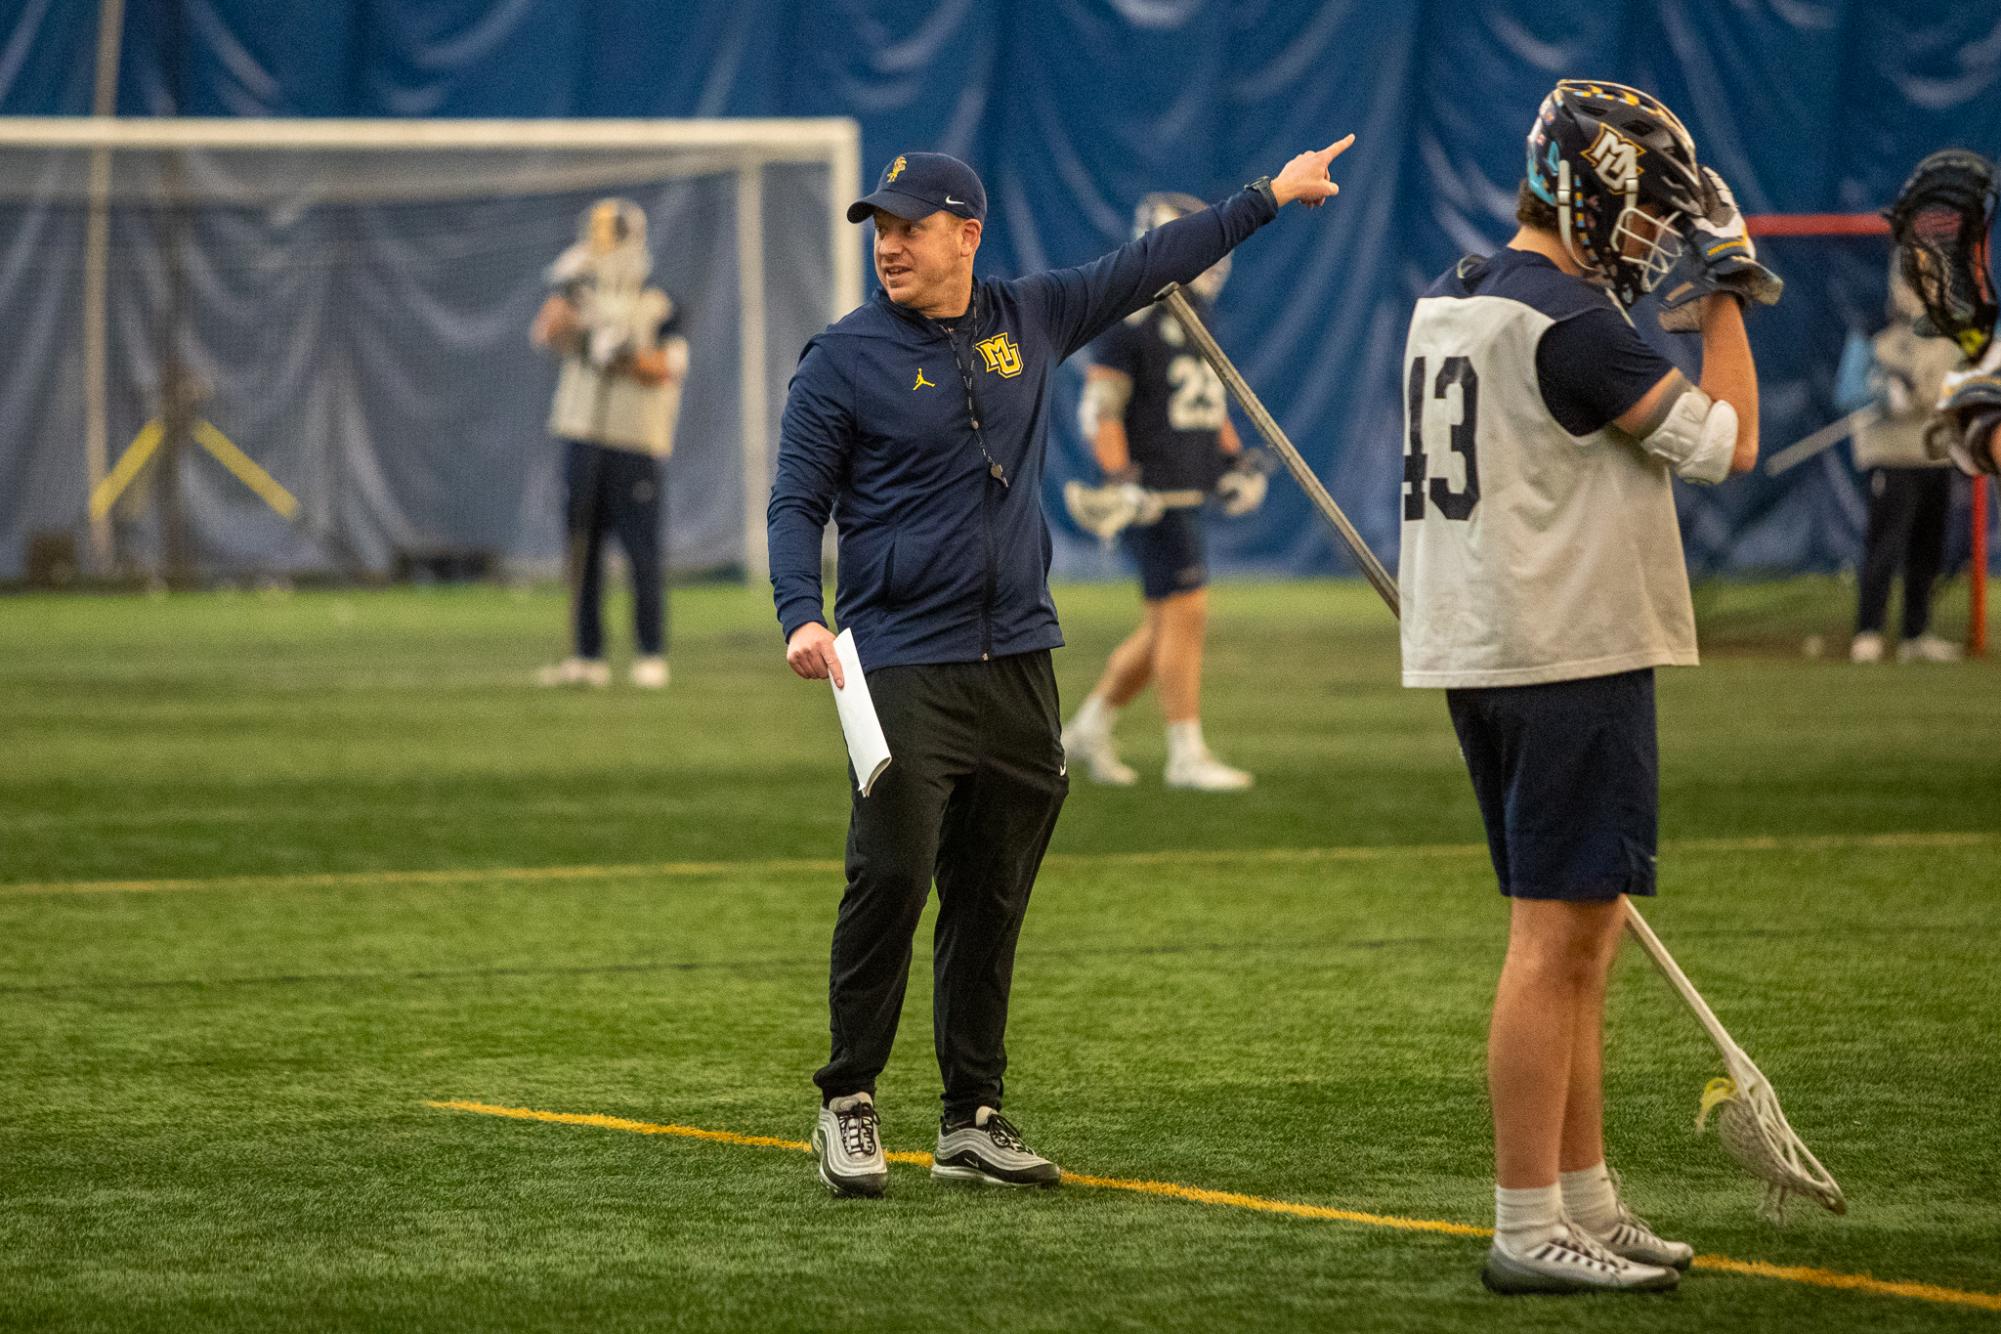 Marquette Men’s Lacrosse Coach Andrew Stimmel Resigns After 5 Years